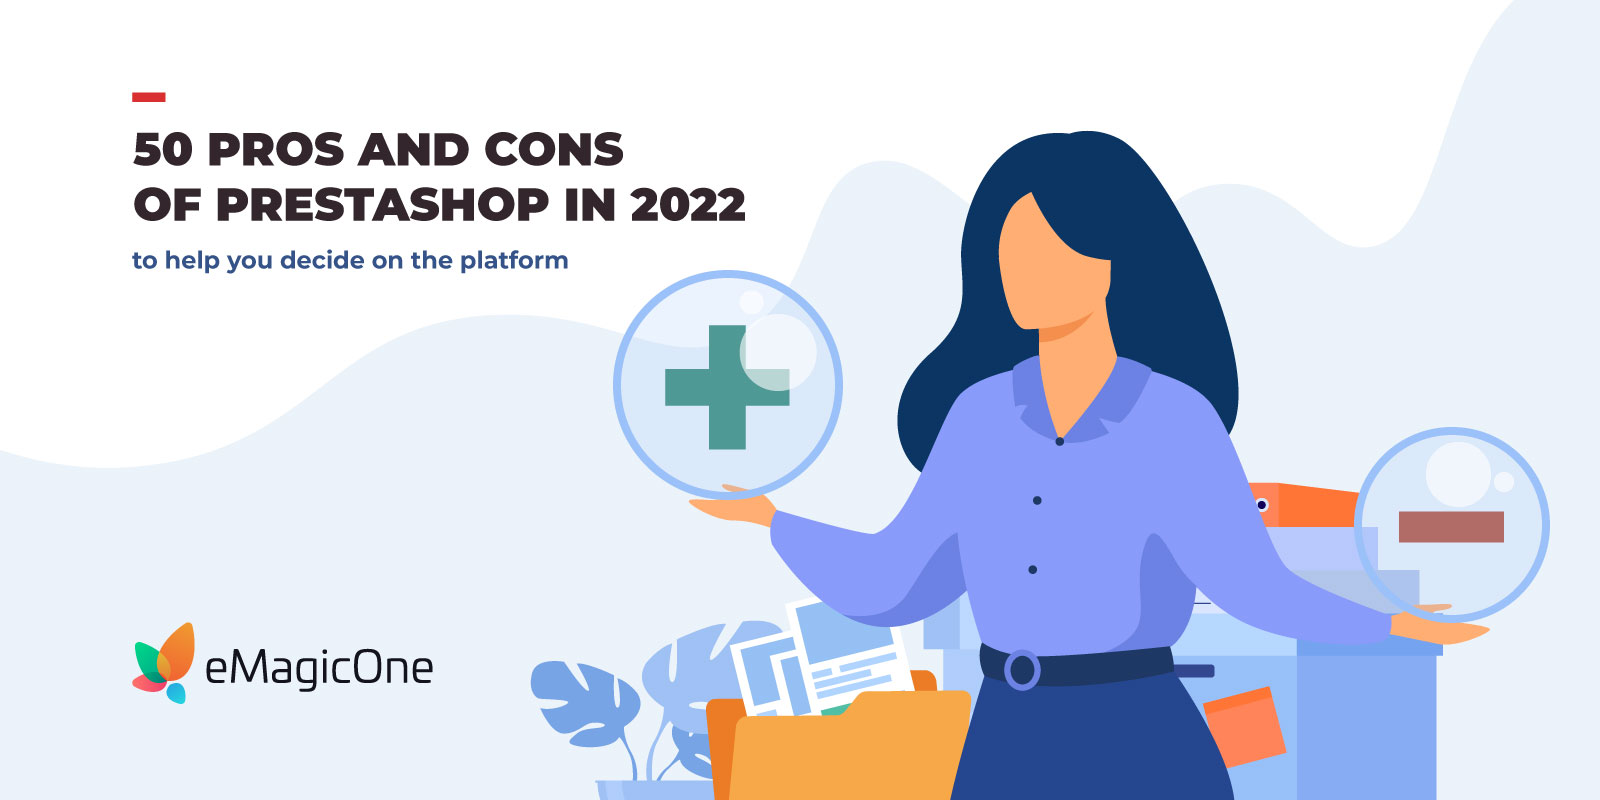 50 pros and cons of PrestaShop in 2022